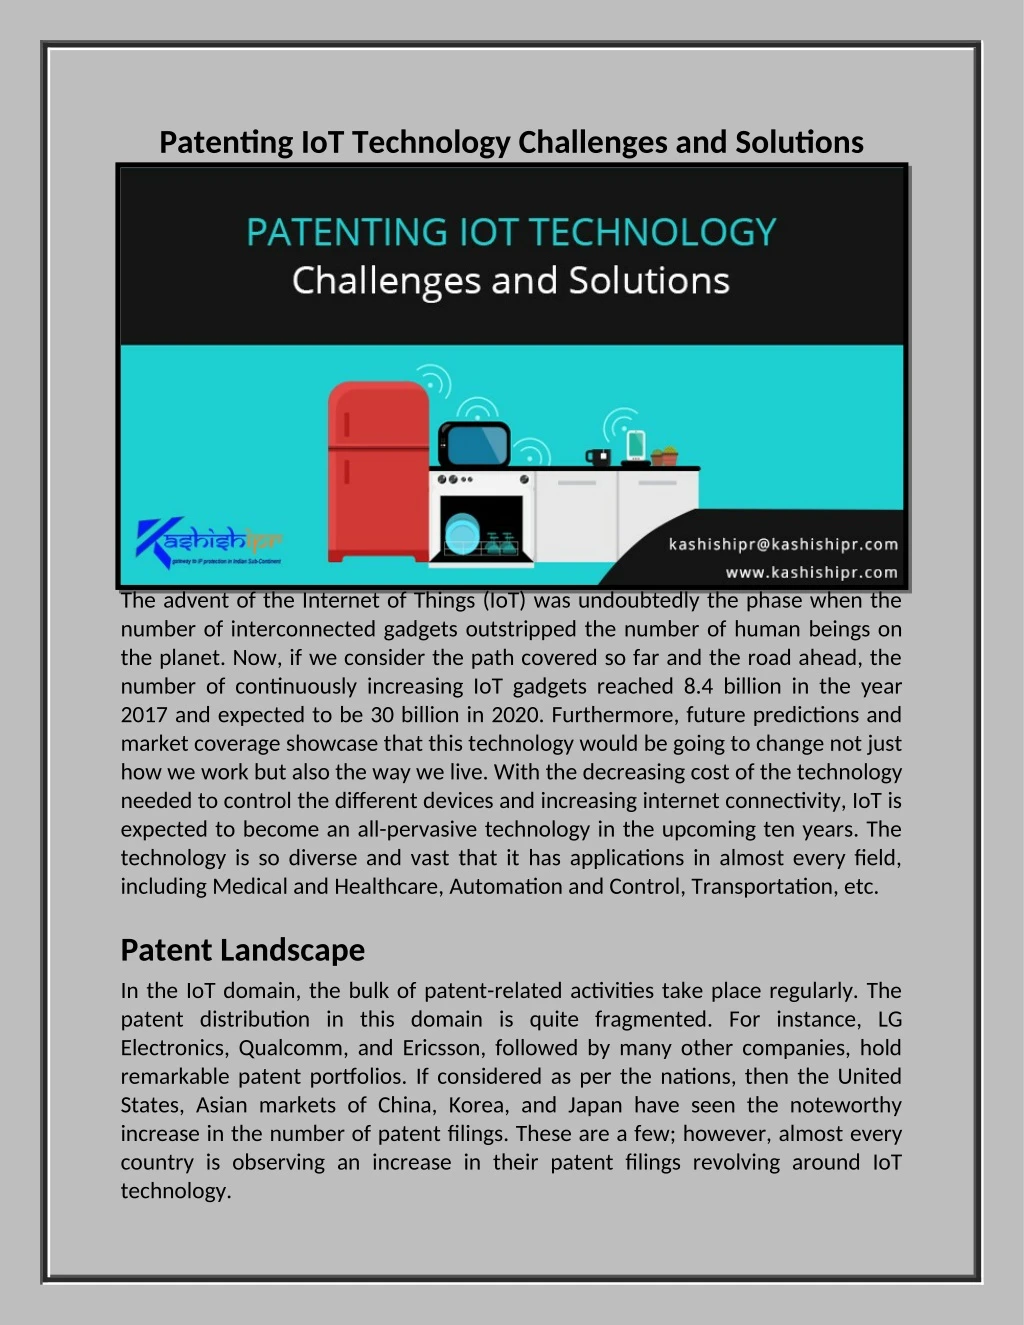 patenting iot technology challenges and solutions